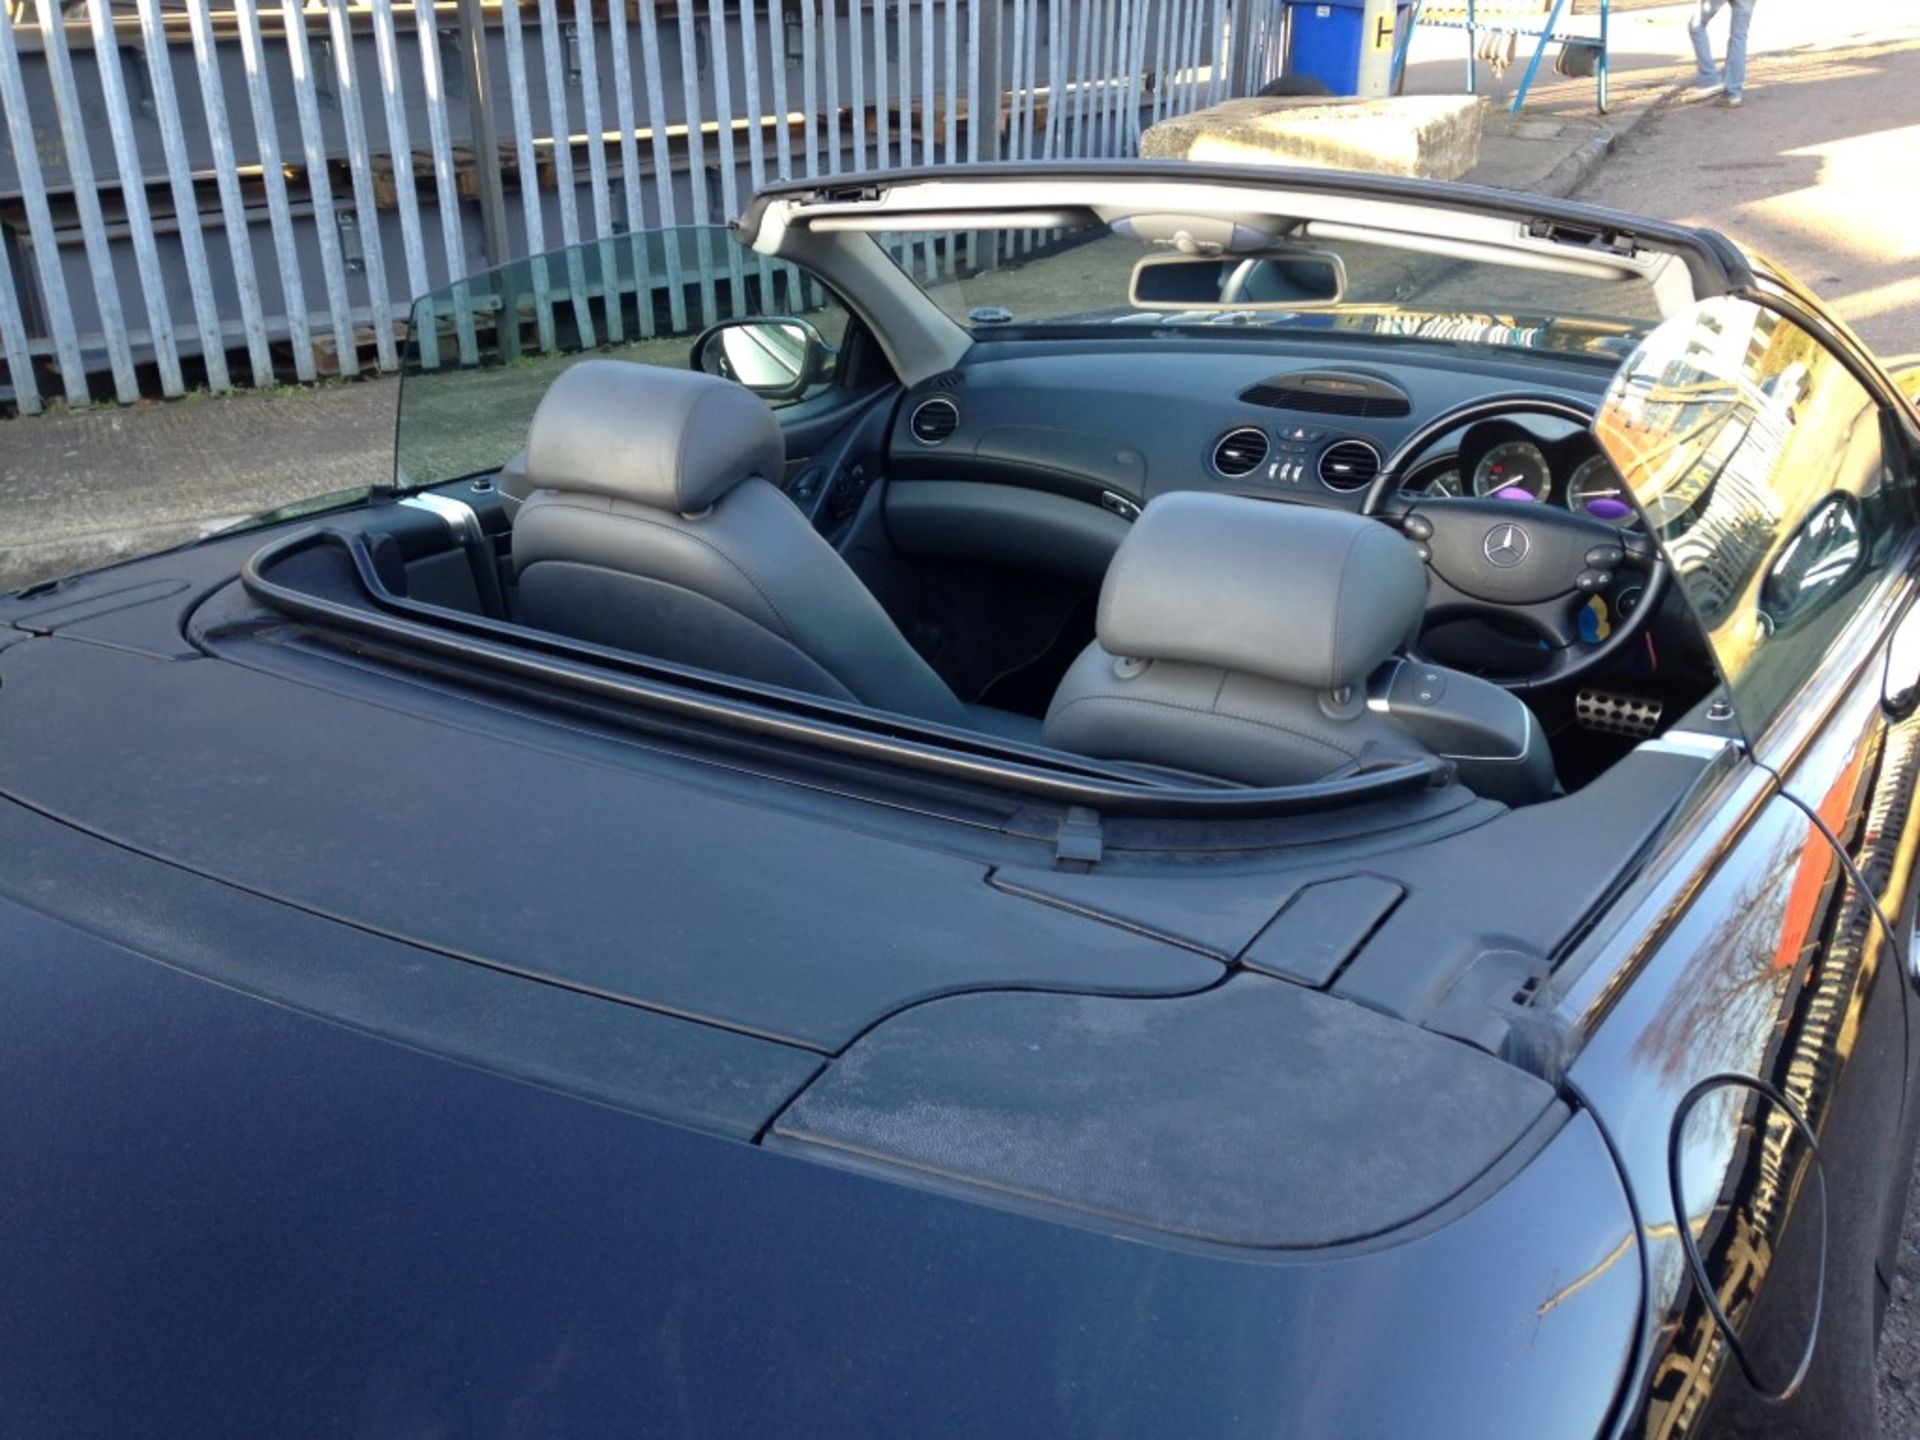 1 x Mercedes SL500 Automatic 5.0 Convertible - Petrol - Year 2002 - 94,500 Miles - Long MOT Expiry - Image 22 of 48